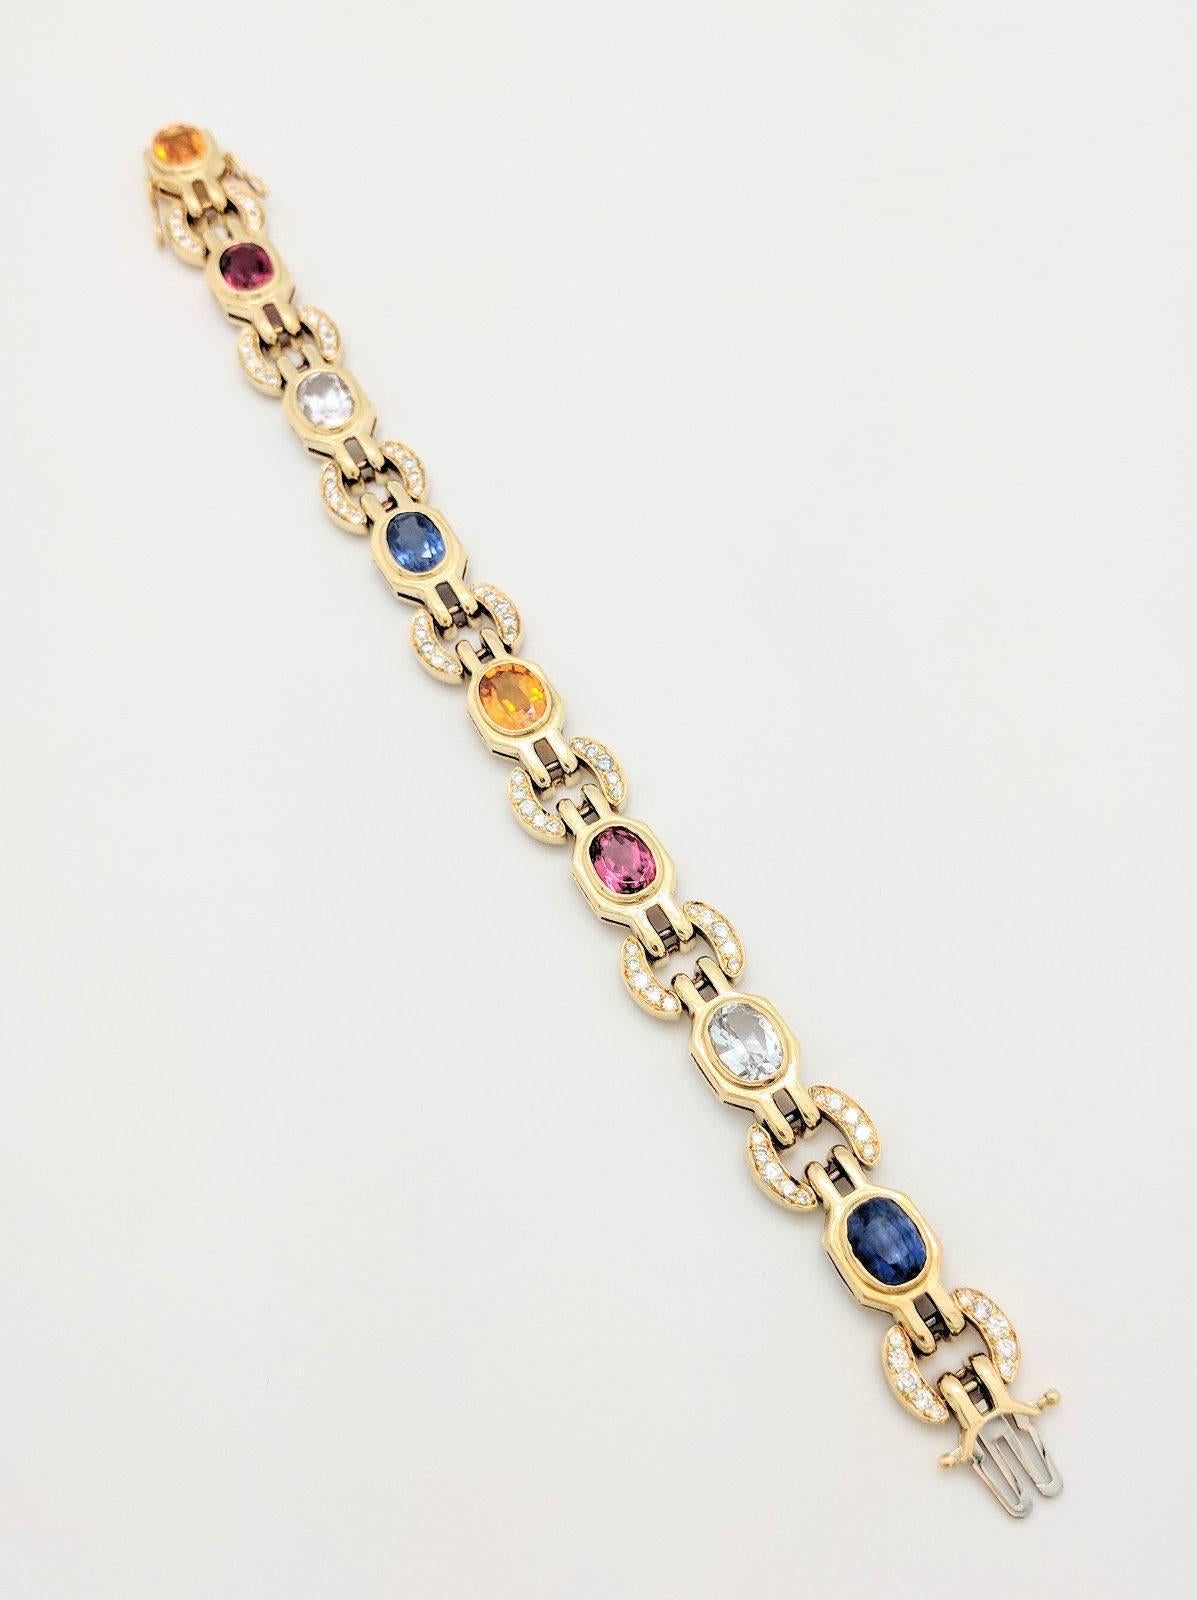 Women's or Men's Ladies 18k Yellow Gold Multi-Colored Sapphire and Diamond Bracelet 31.2 Grams For Sale